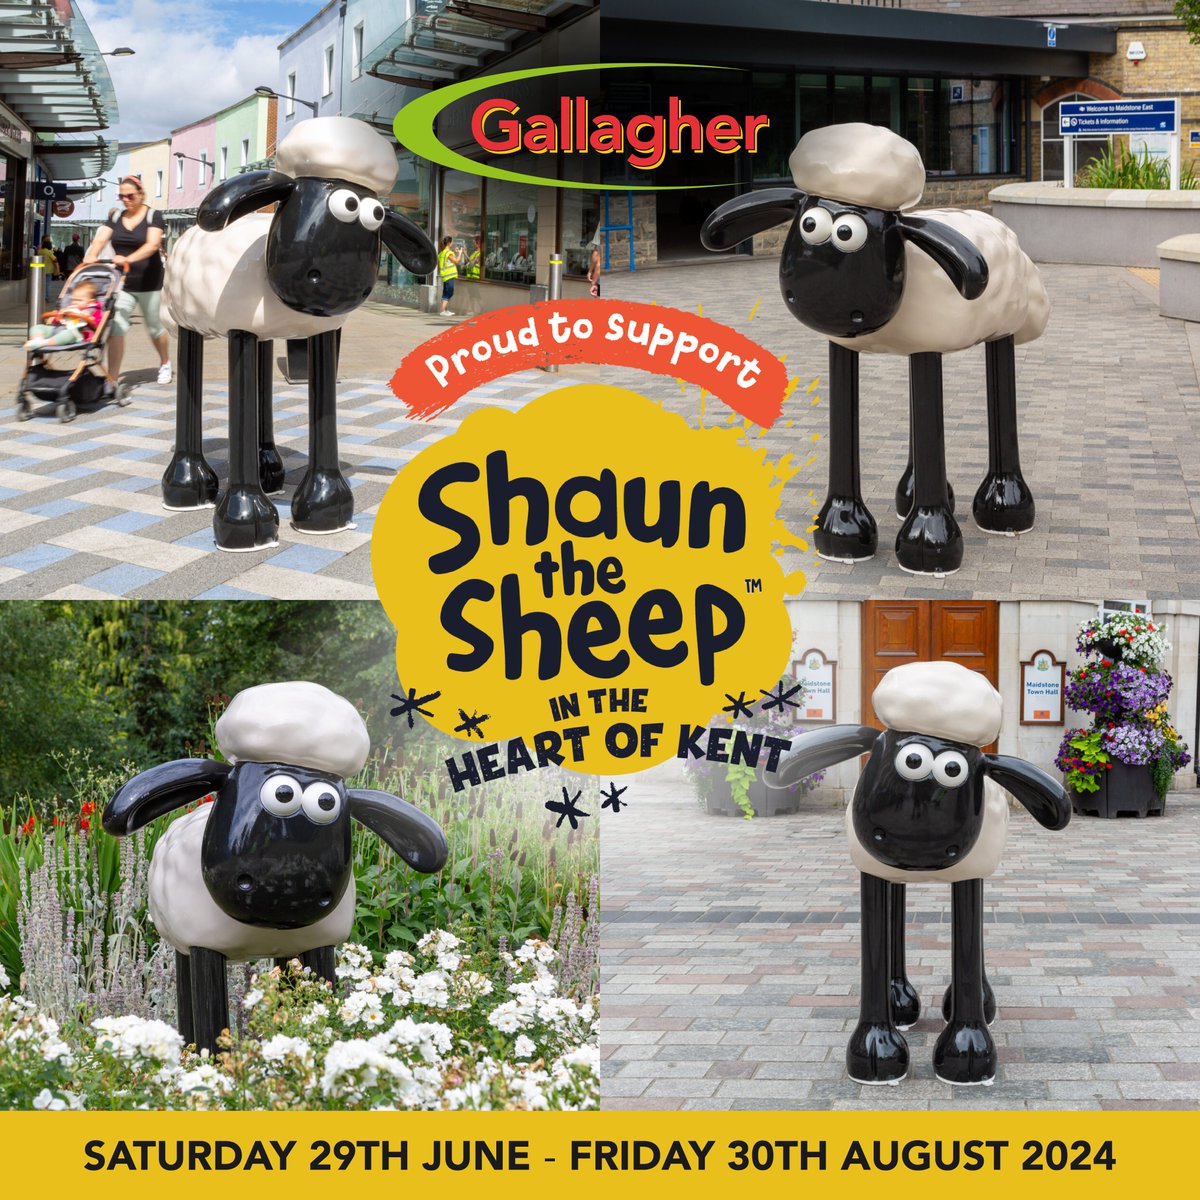 Shaun In The Heart of Kent Trail is coming to Maidstone, featuring up to 50 Shaun the Sheep sculptures created by local and national artists, and we are proud partners. Join us from 29 Jun to 30 Aug 2024 for this celebration of art and community spirit! 🎨🐑 #ShaunHeartKent